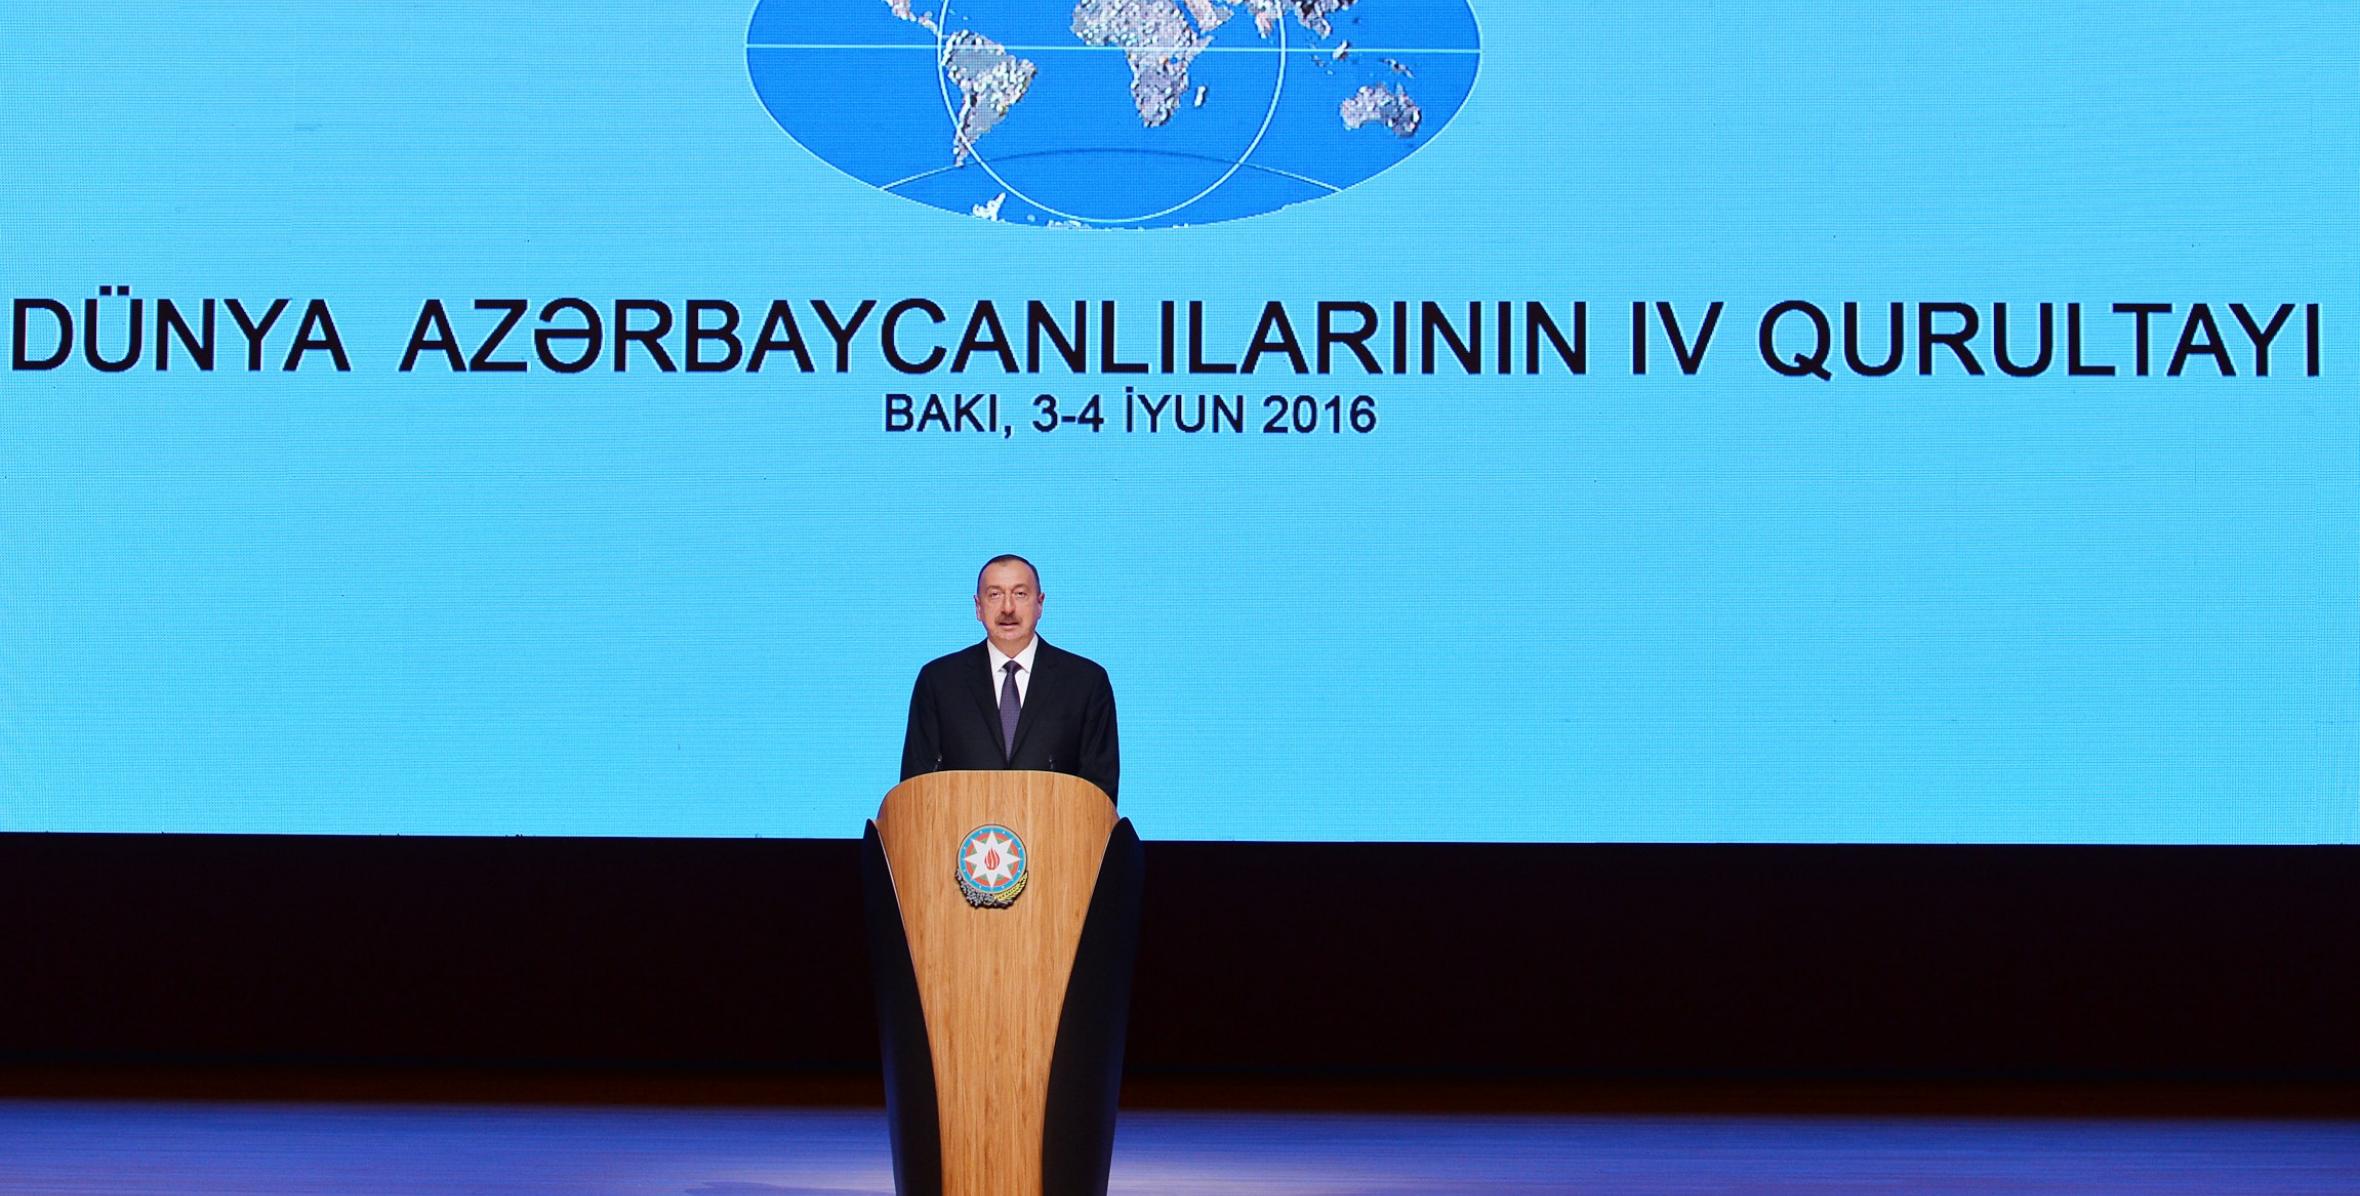 Speech by Ilham Aliyev at the opening of fourth Congress of World Azerbaijanis